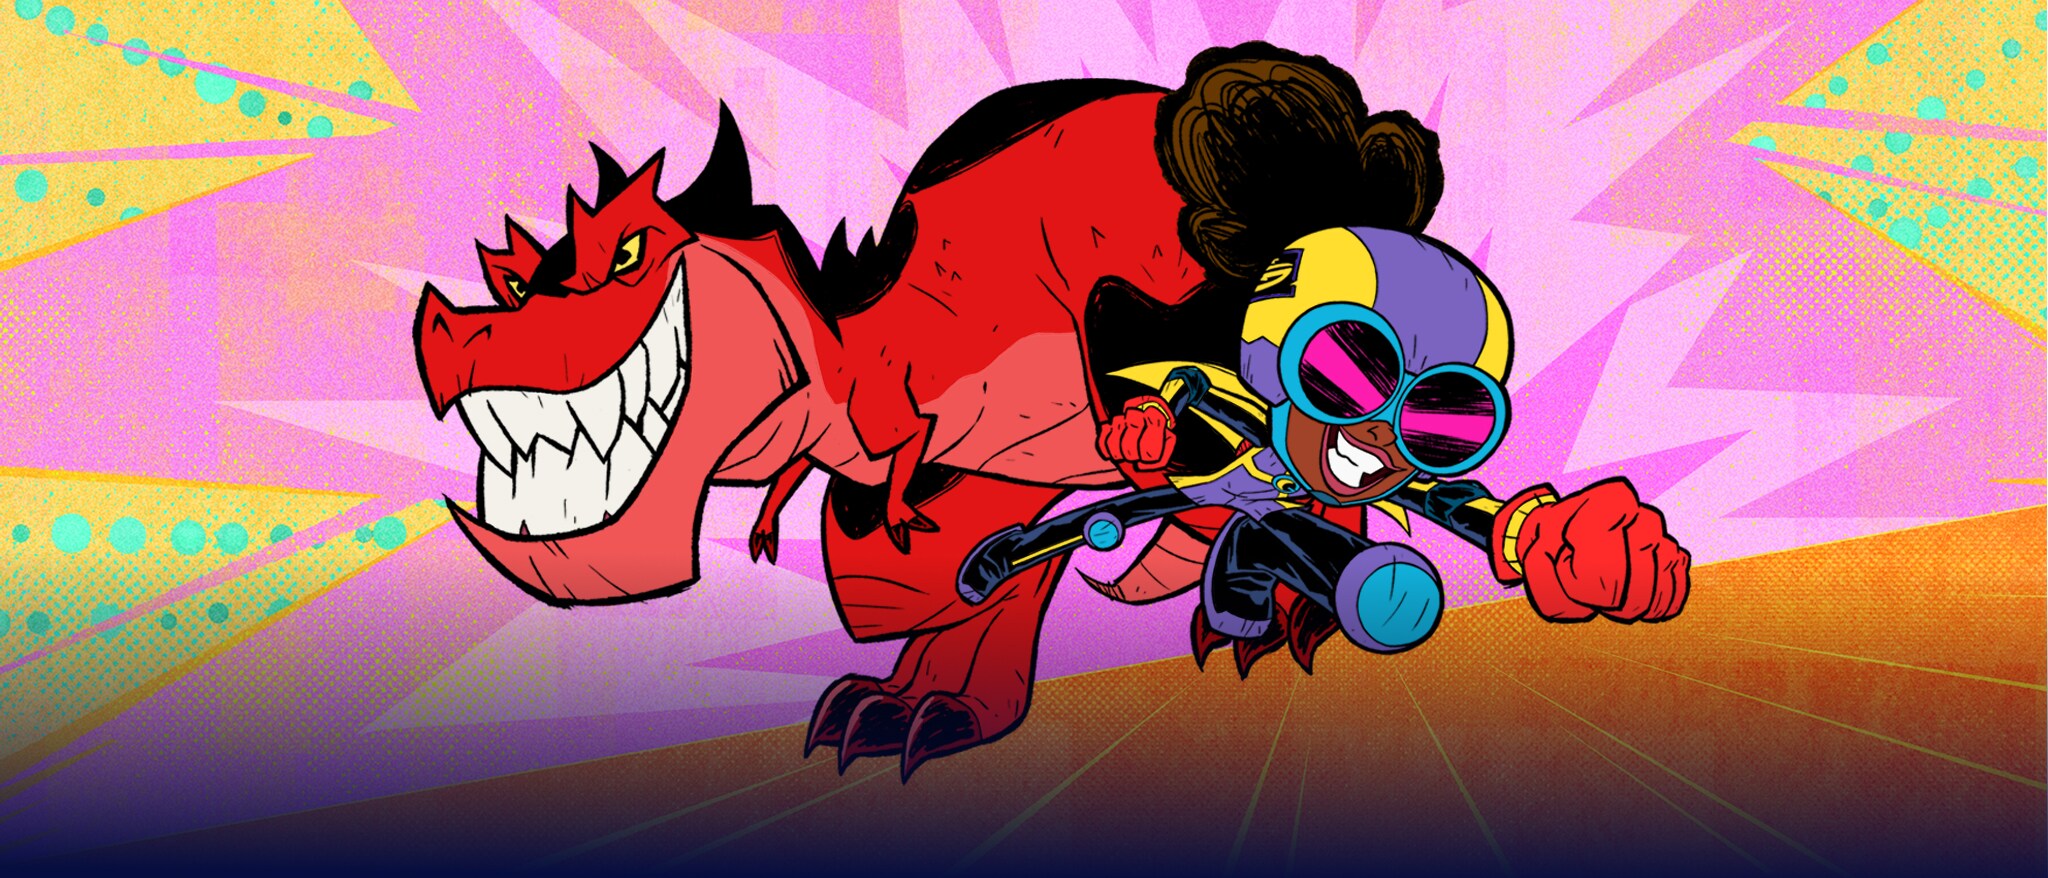 Marvel's Moon Girl and Devil Dinosaur Season 2 - Featured Content Banner